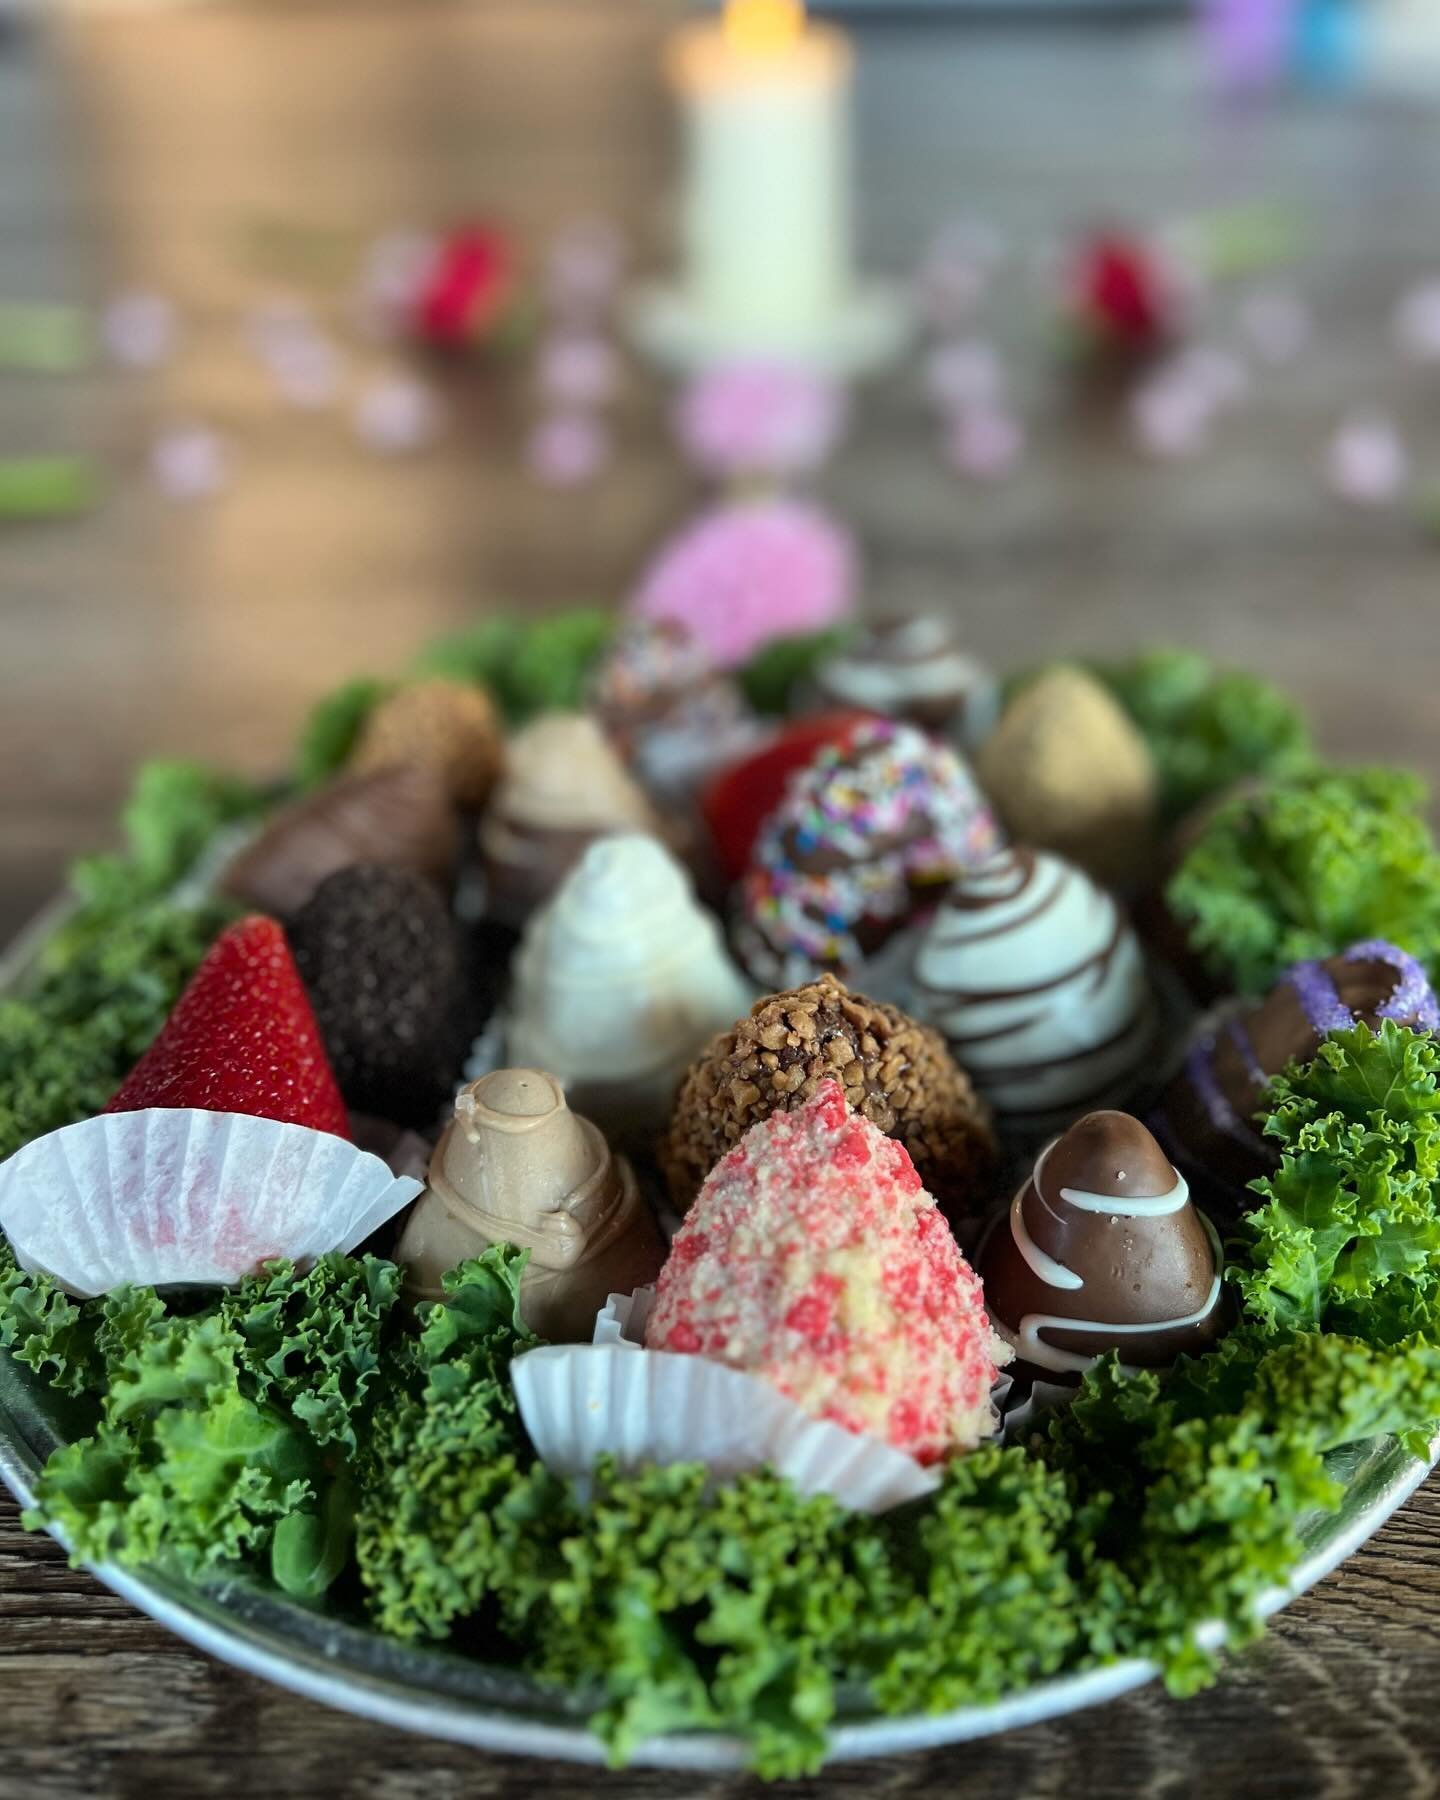 Tonight&rsquo;s moon circle was Yummy! Thank you @orchardberryarrangements for always making the best chocolate dipped strawberries! Tonight @mvmtyogacollective_ we indulged in pleasure and abundance 🍓